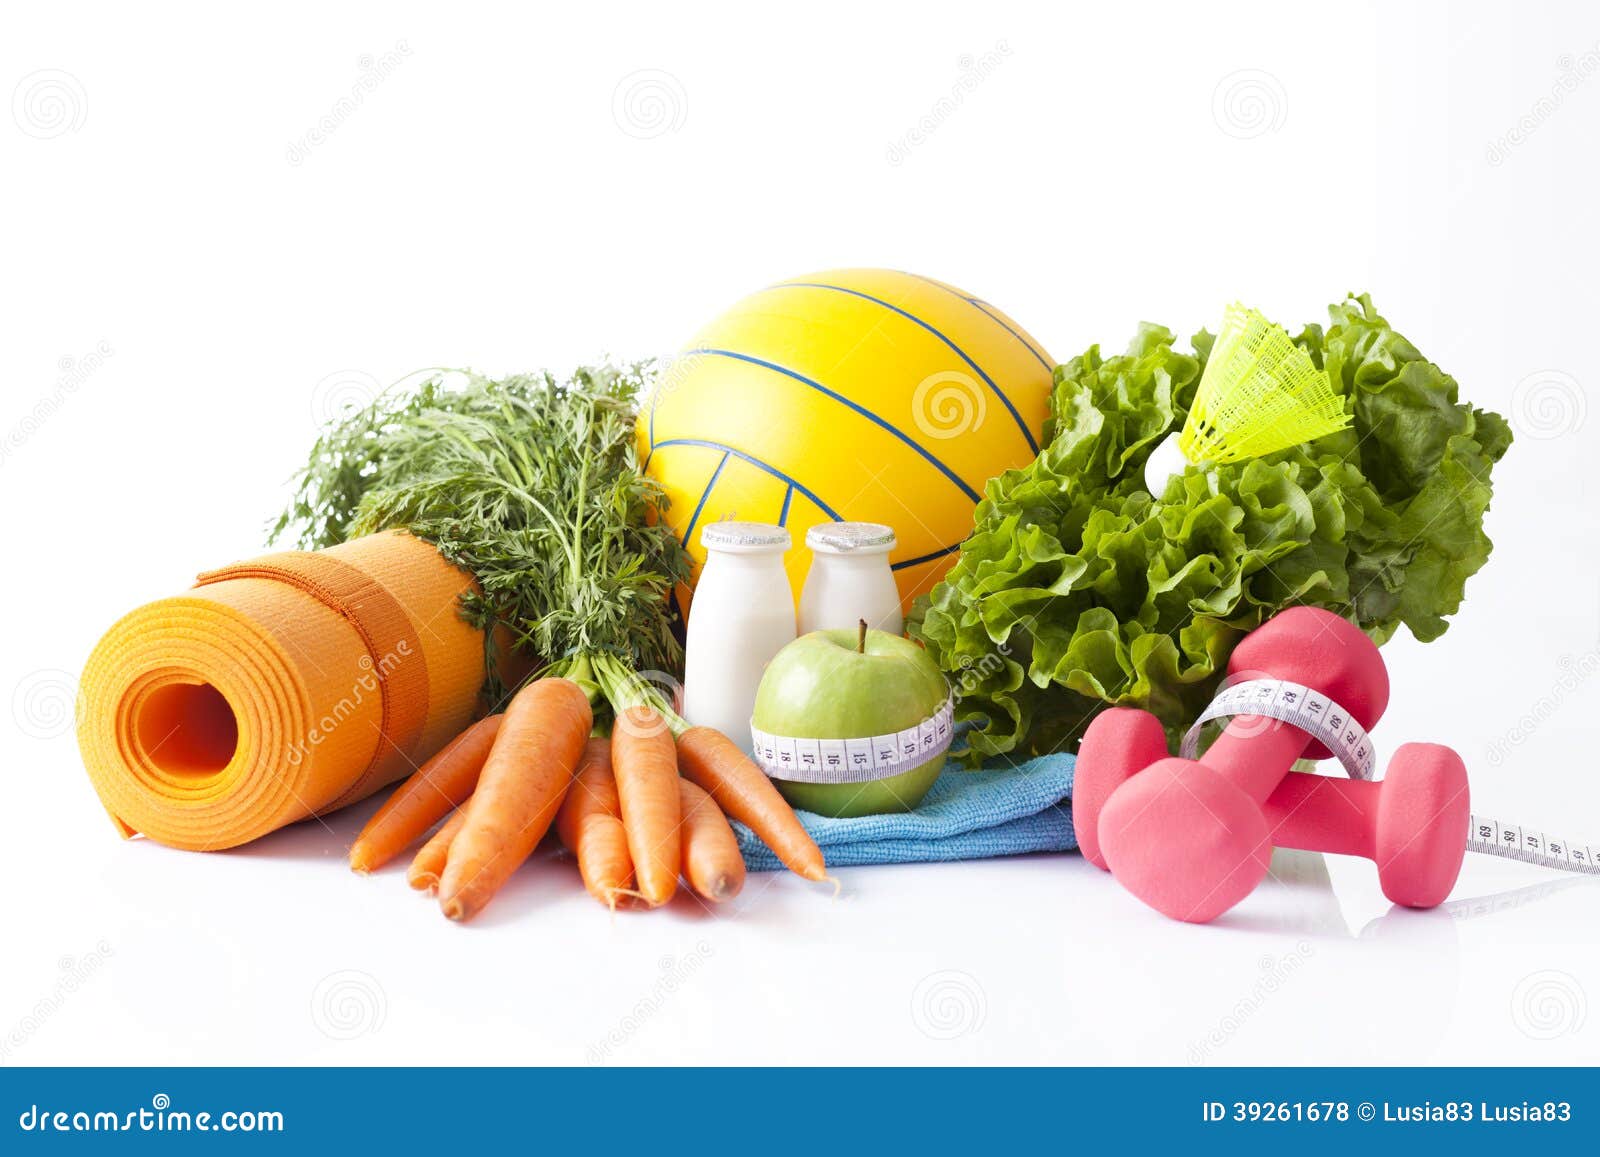 fitness food and sport activity concept